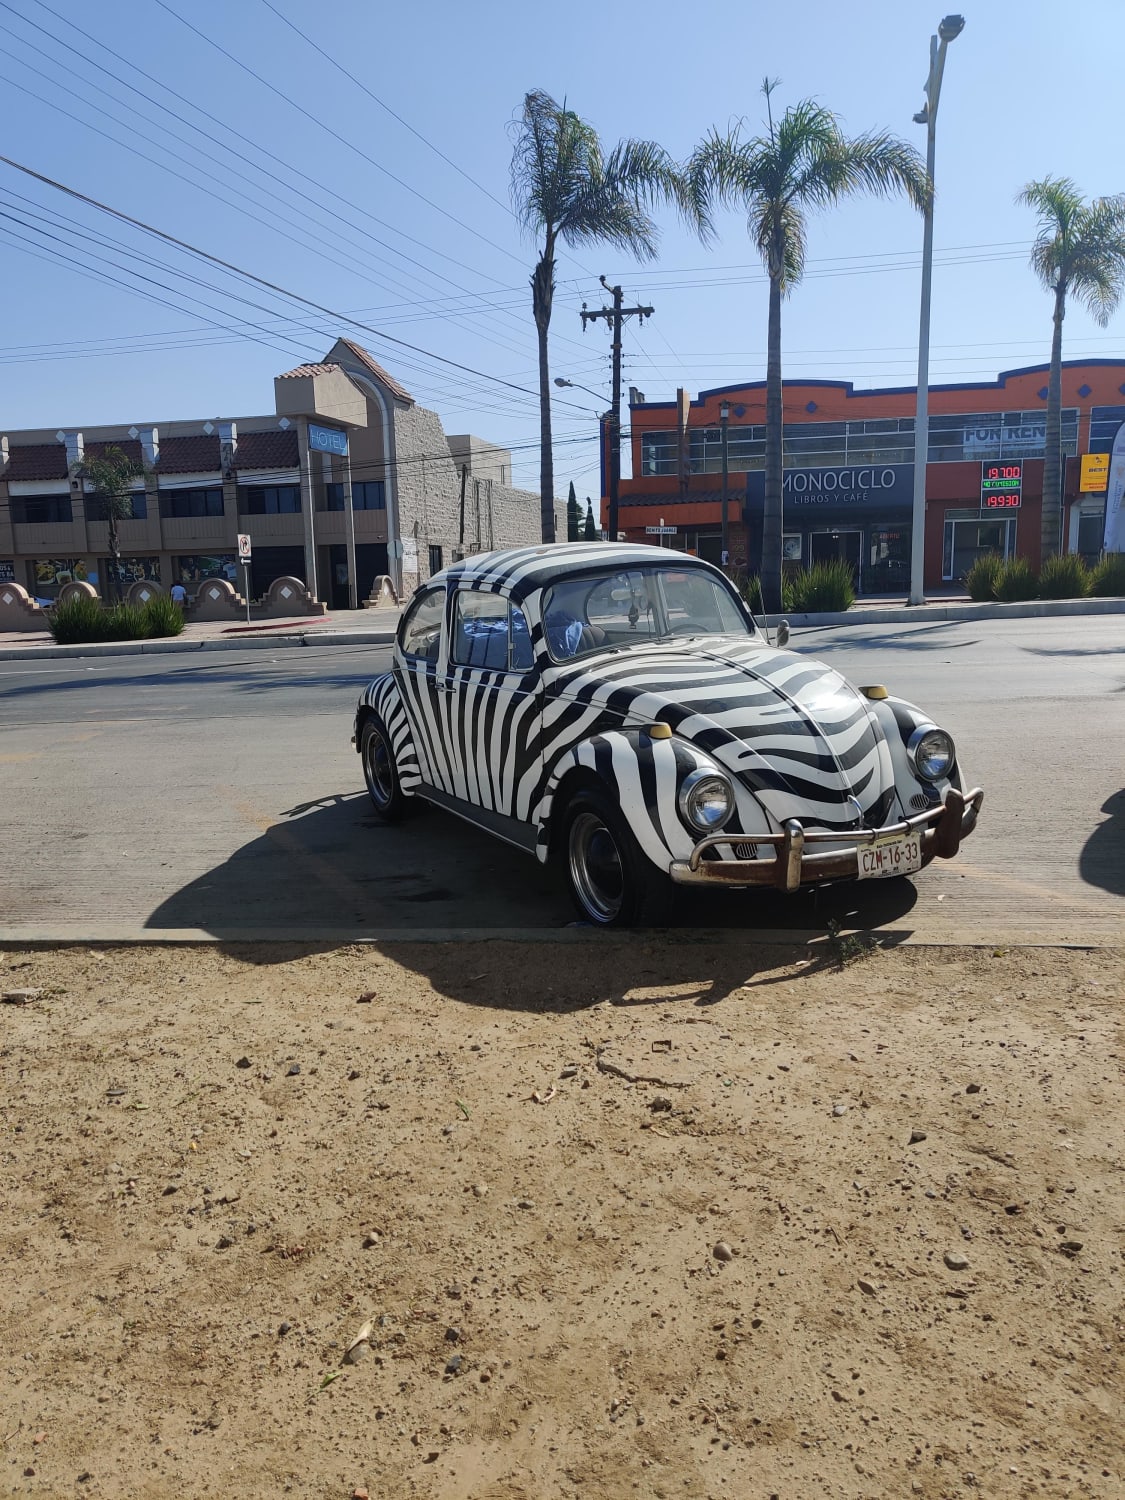 Seen a couple beetles here in Baja Cali but this takes the cake. Dare I say zebra cake